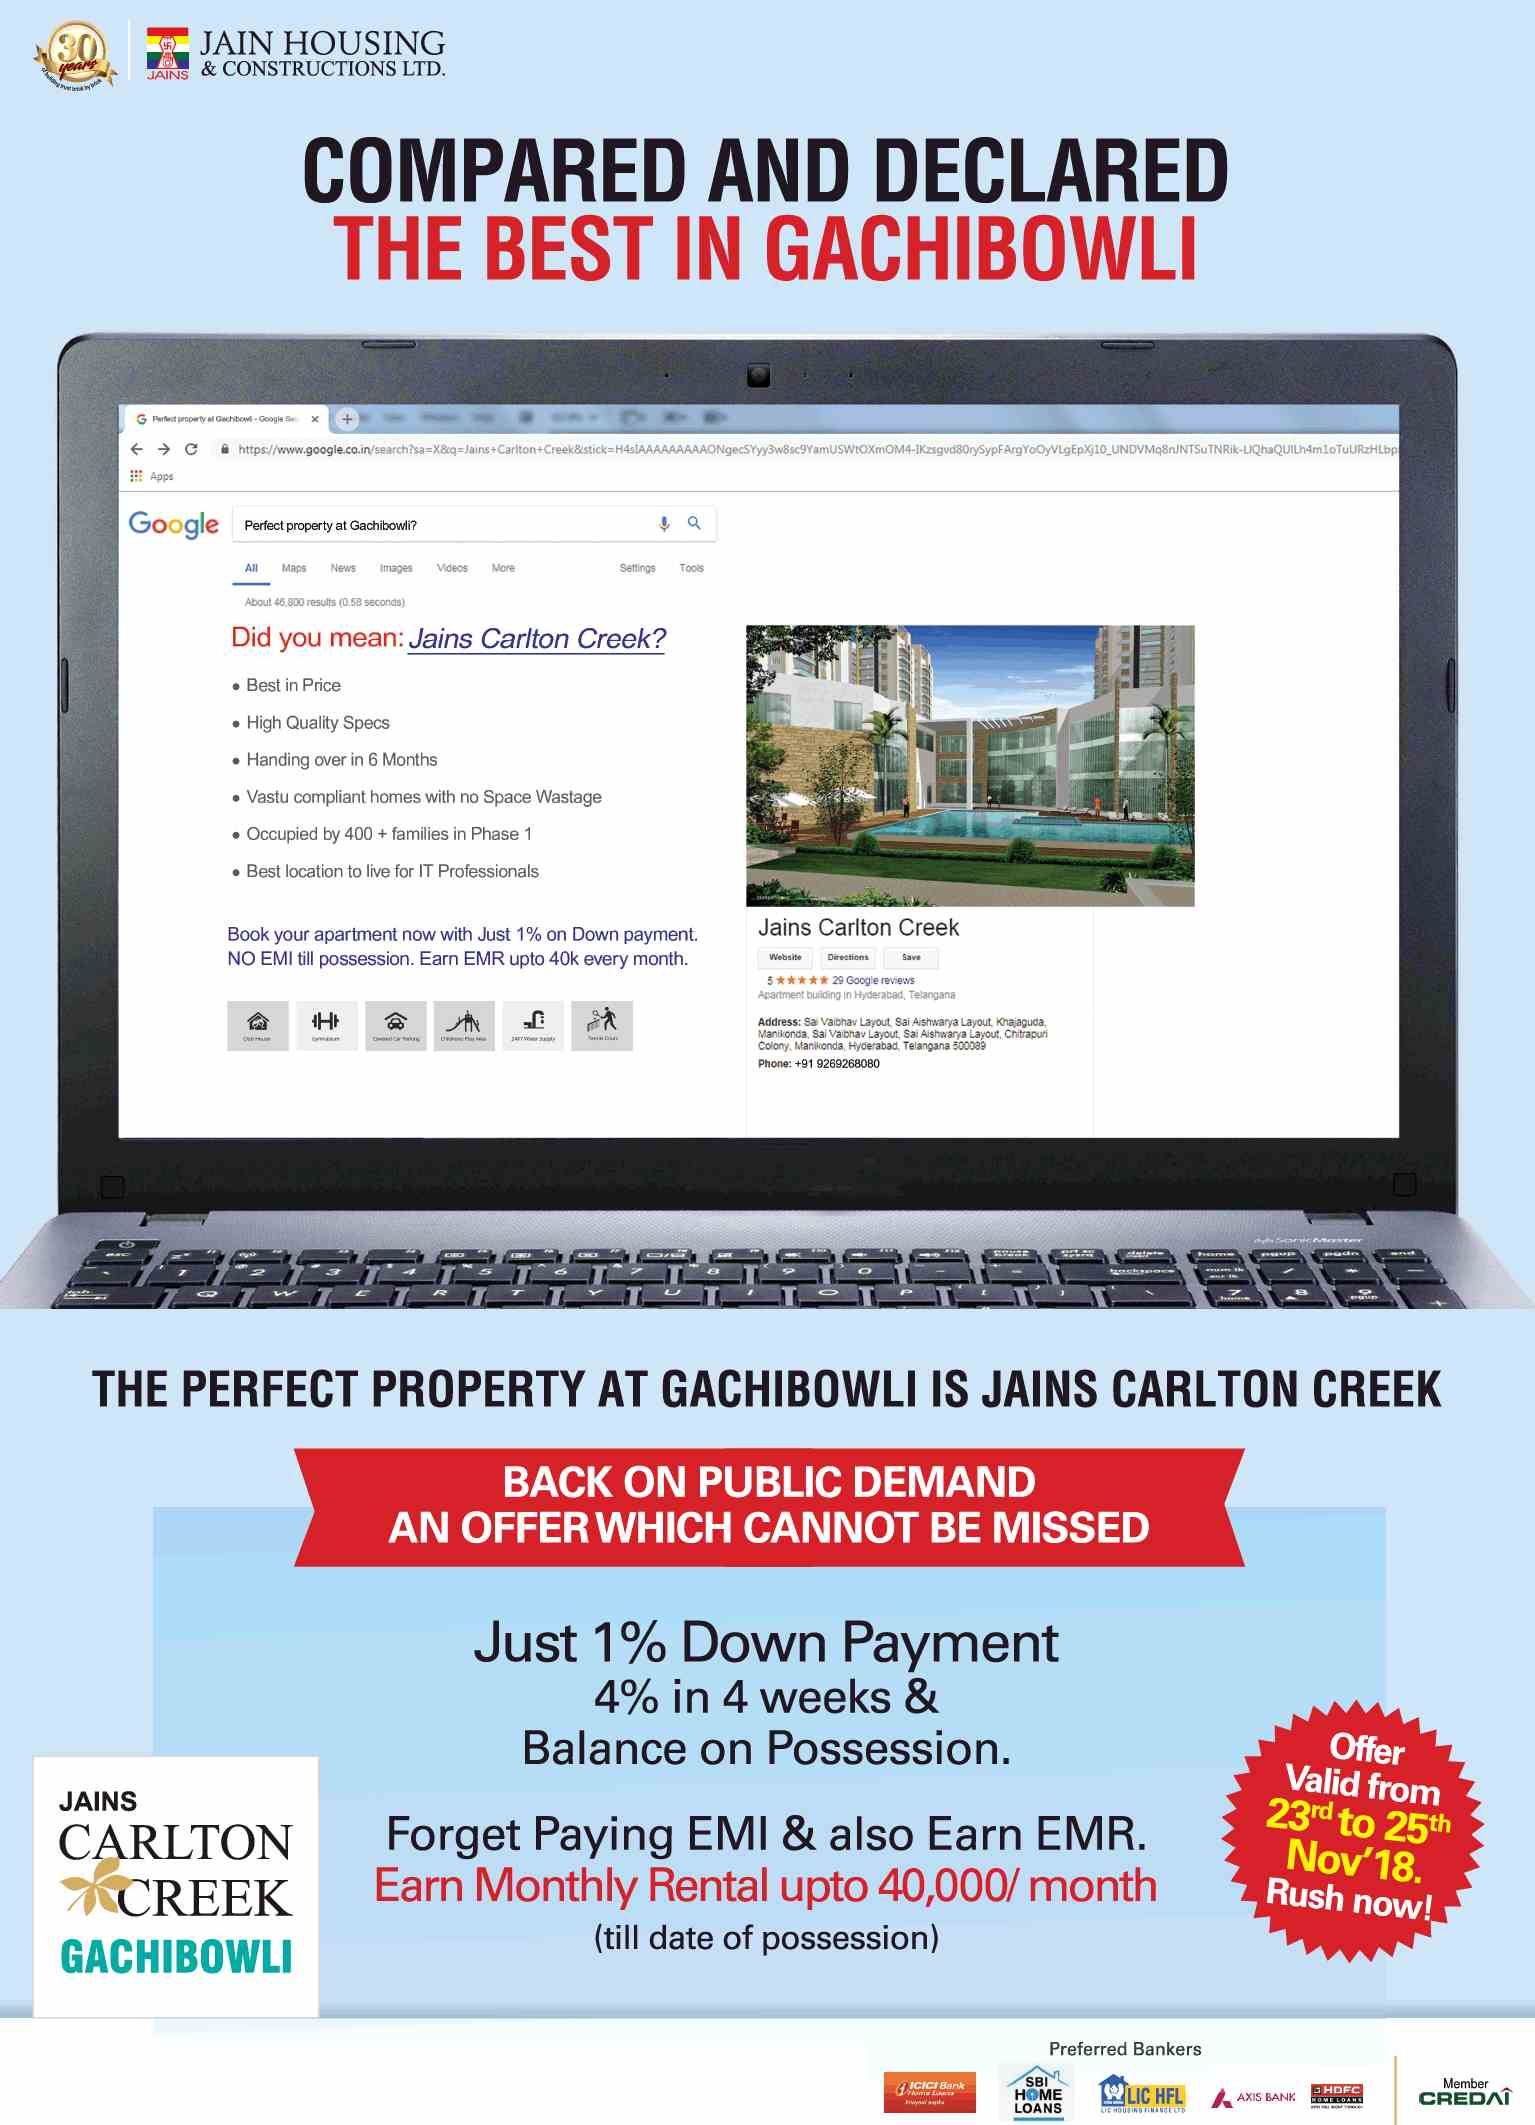 Just 1% down payment and balance on possession at Jains Carlton Creek in Hyderabad Update